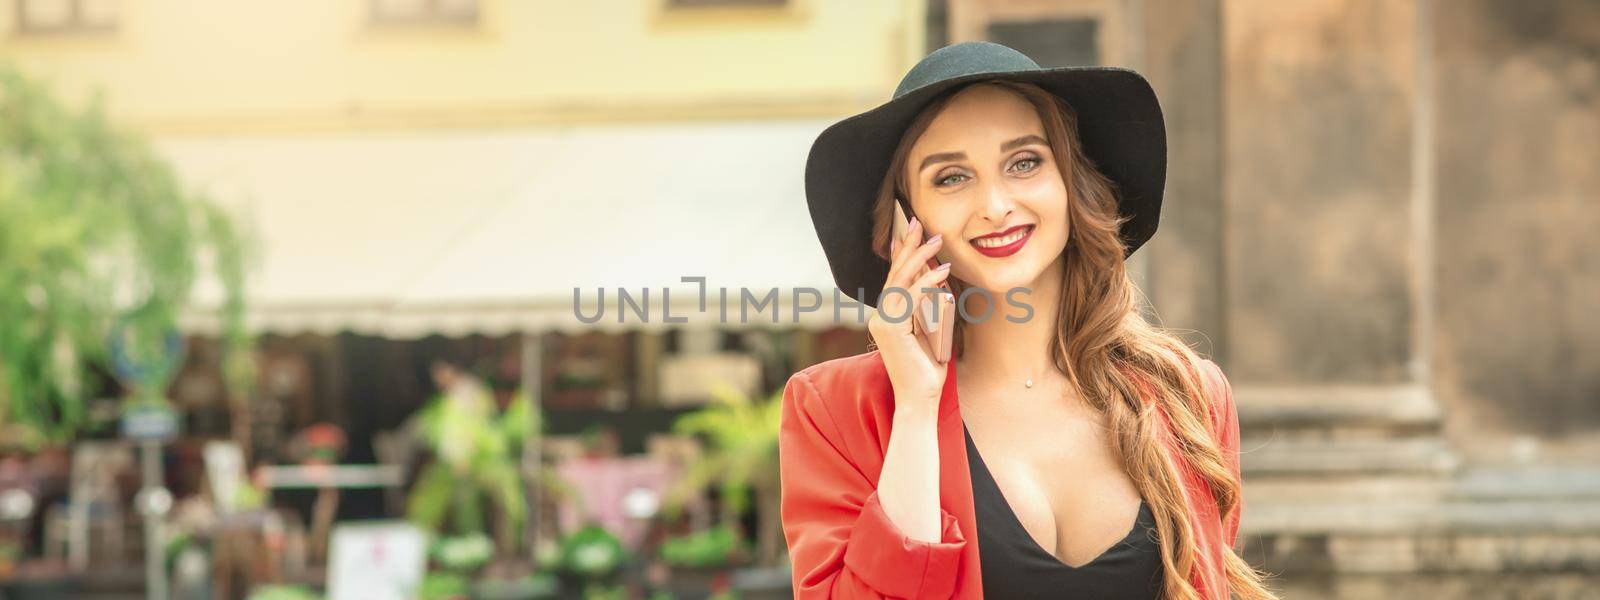 Portrait of young smiling fashionable girl talking by phone wearing black hat outdoors on the city street.